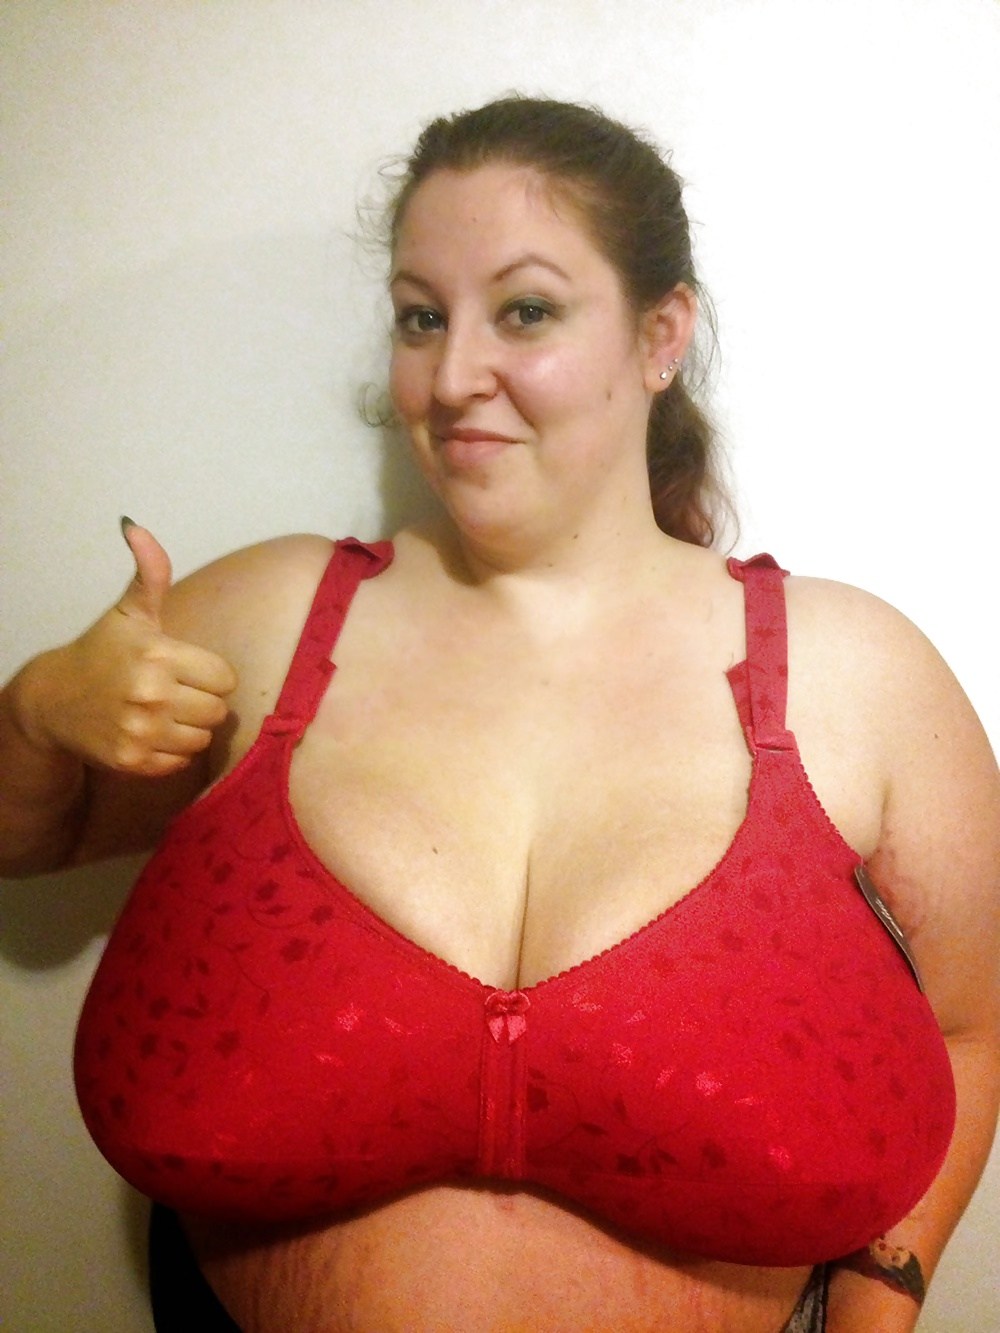 Huge Fat Boobs in a Bra (68 photos) image